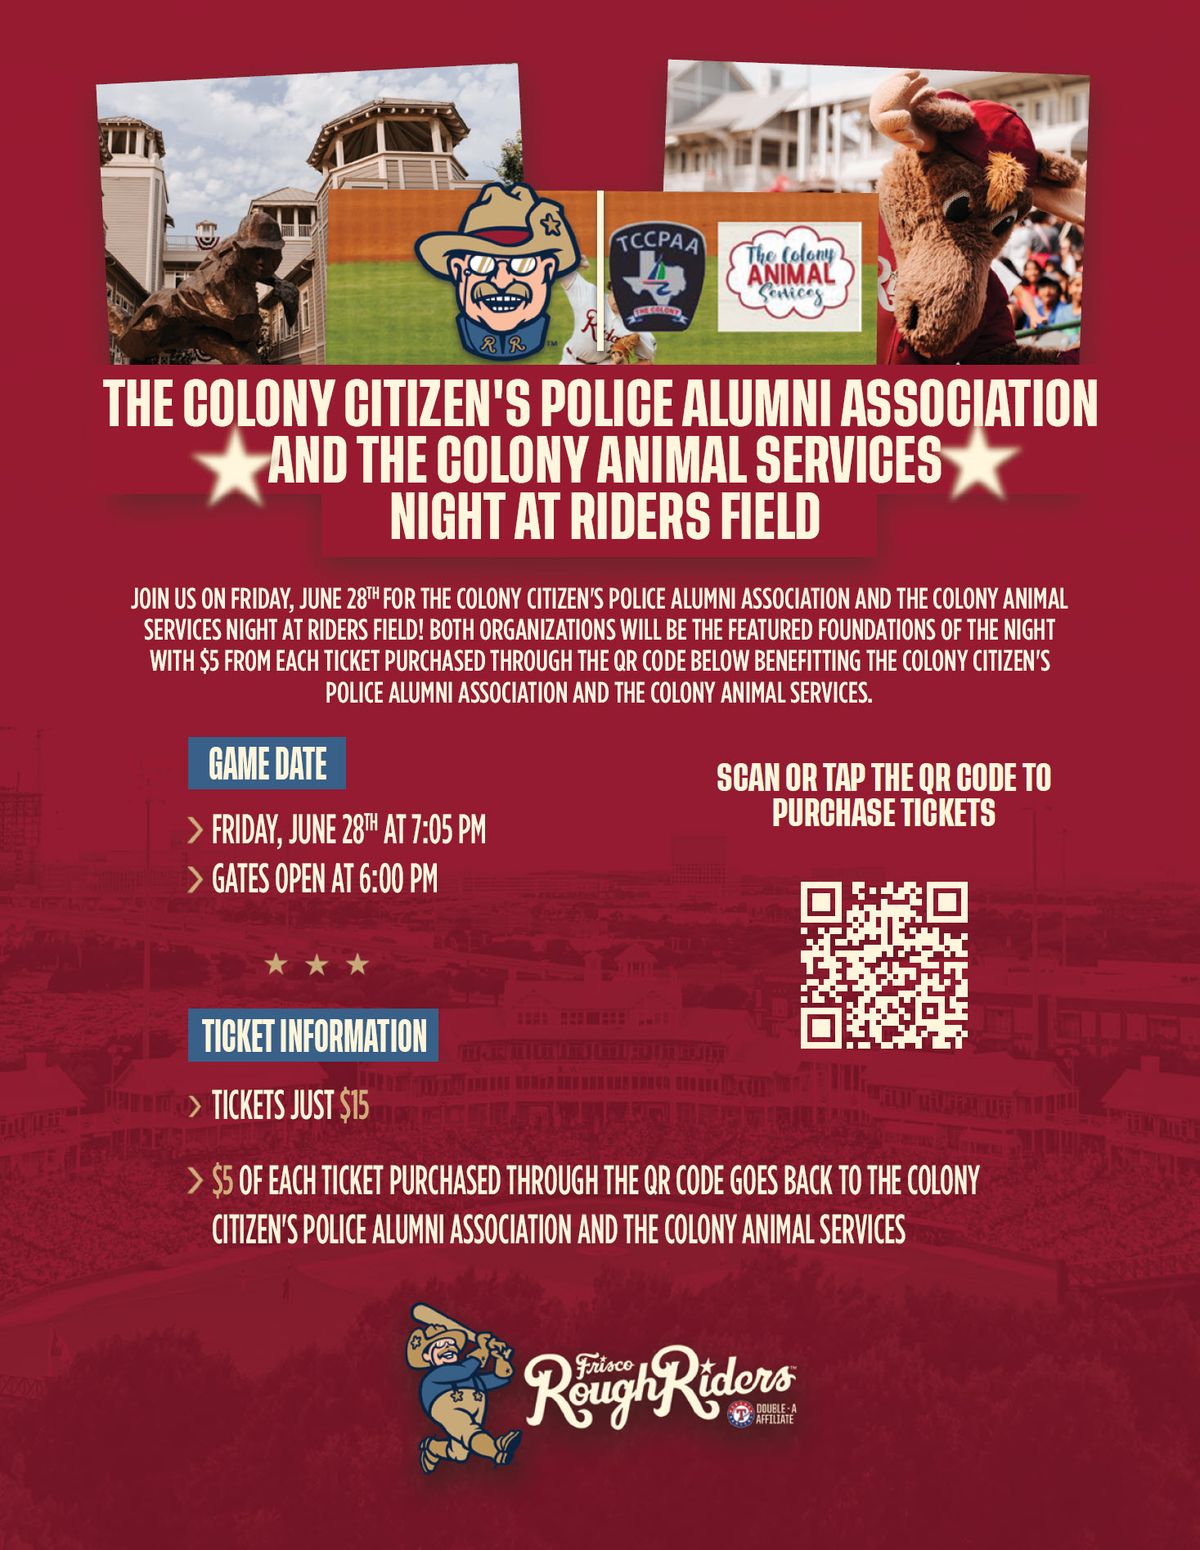 The Colony CPAA and Animal Shelter - Night at Riders Field Fundraiser